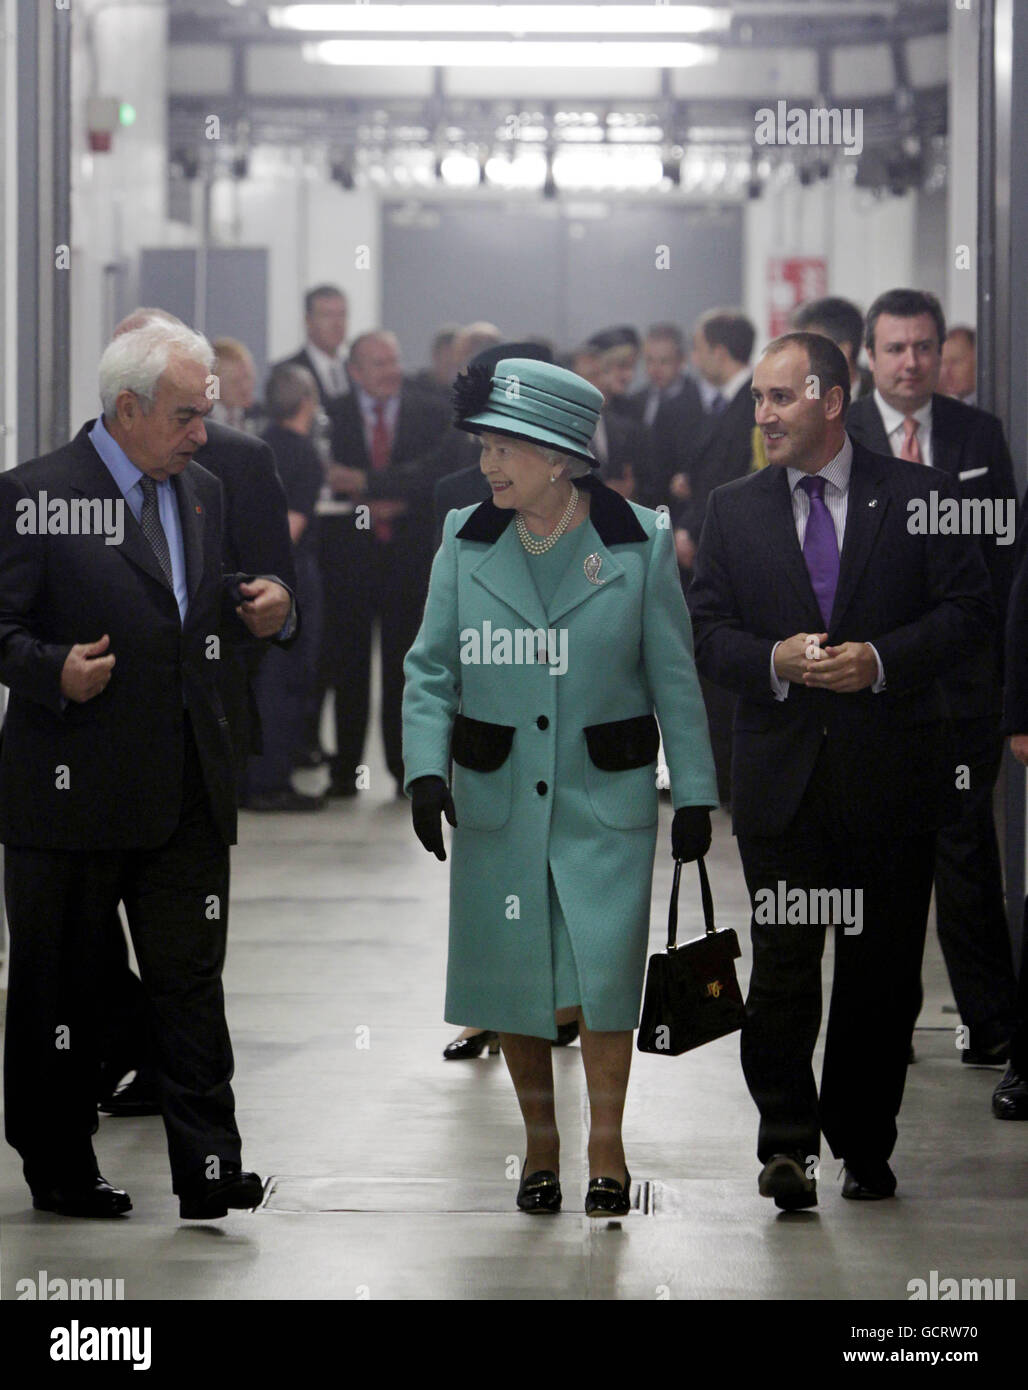 Alan Smith Regional Supply chain Director (left) and George David Chairman of Coca-Cola Hellenic (right) give Queen Elizabeth II a tour around the Coca-Cola bottling plant in Lisburn before she opened the new visitors centre. Stock Photo